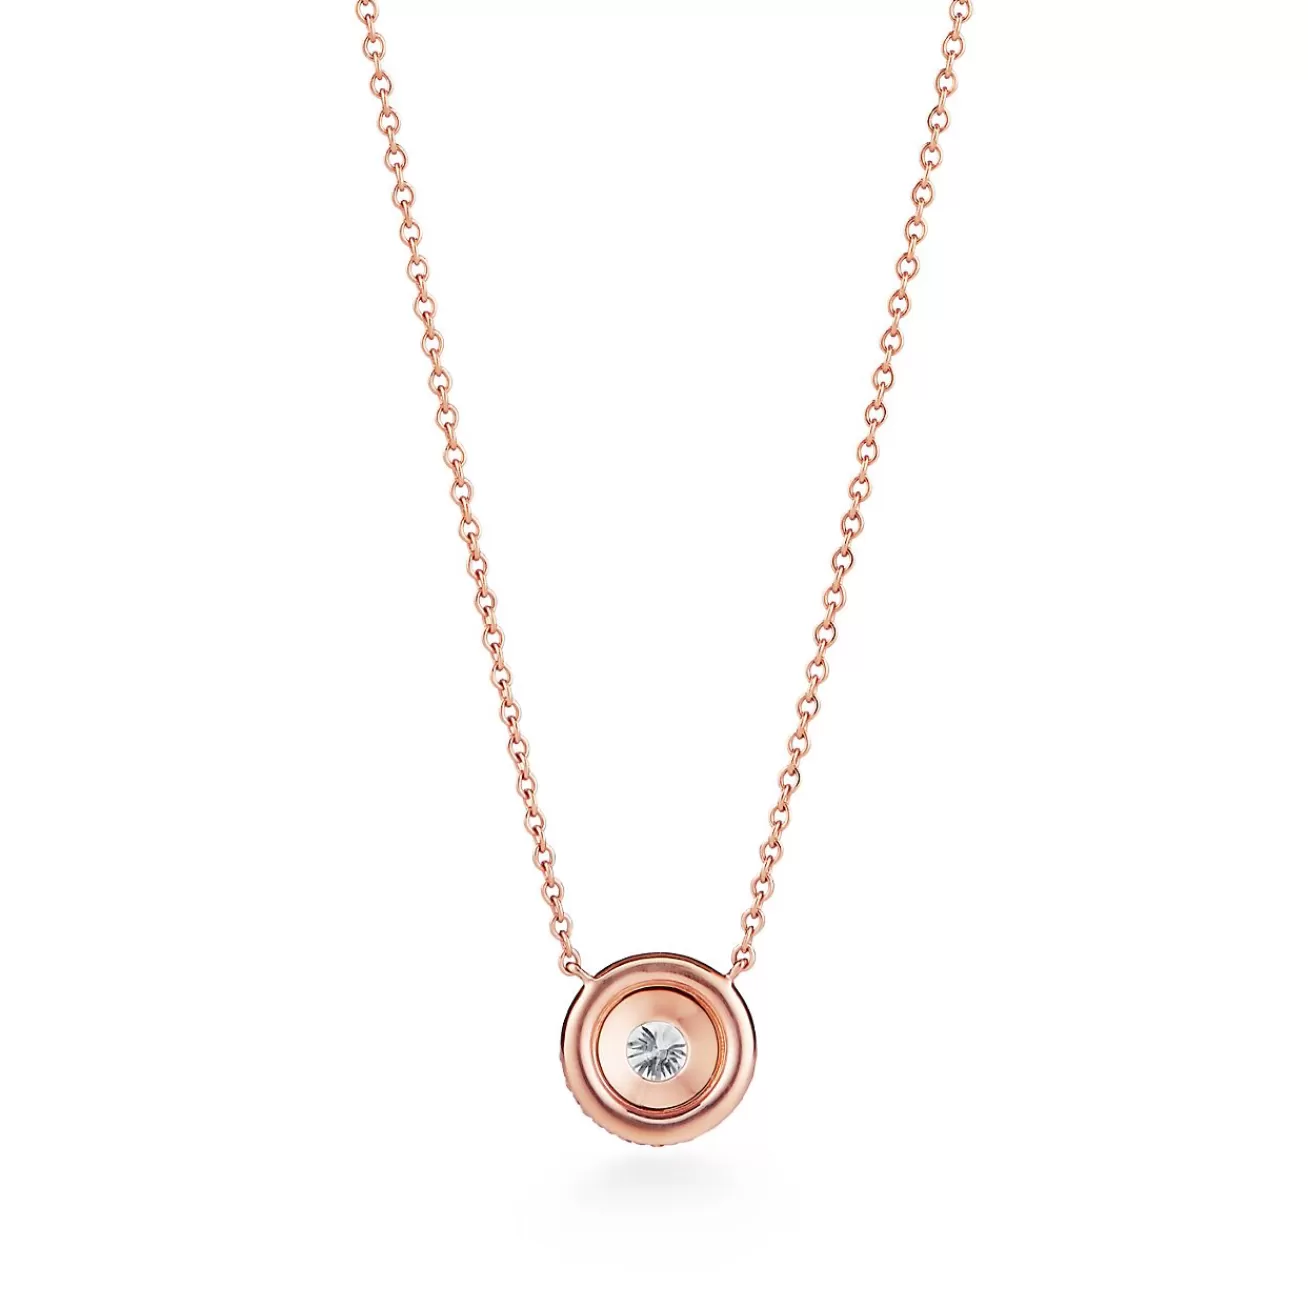 Tiffany & Co. Tiffany Soleste® pendant in 18k rose gold with diamonds. | ^ Necklaces & Pendants | Dainty Jewelry